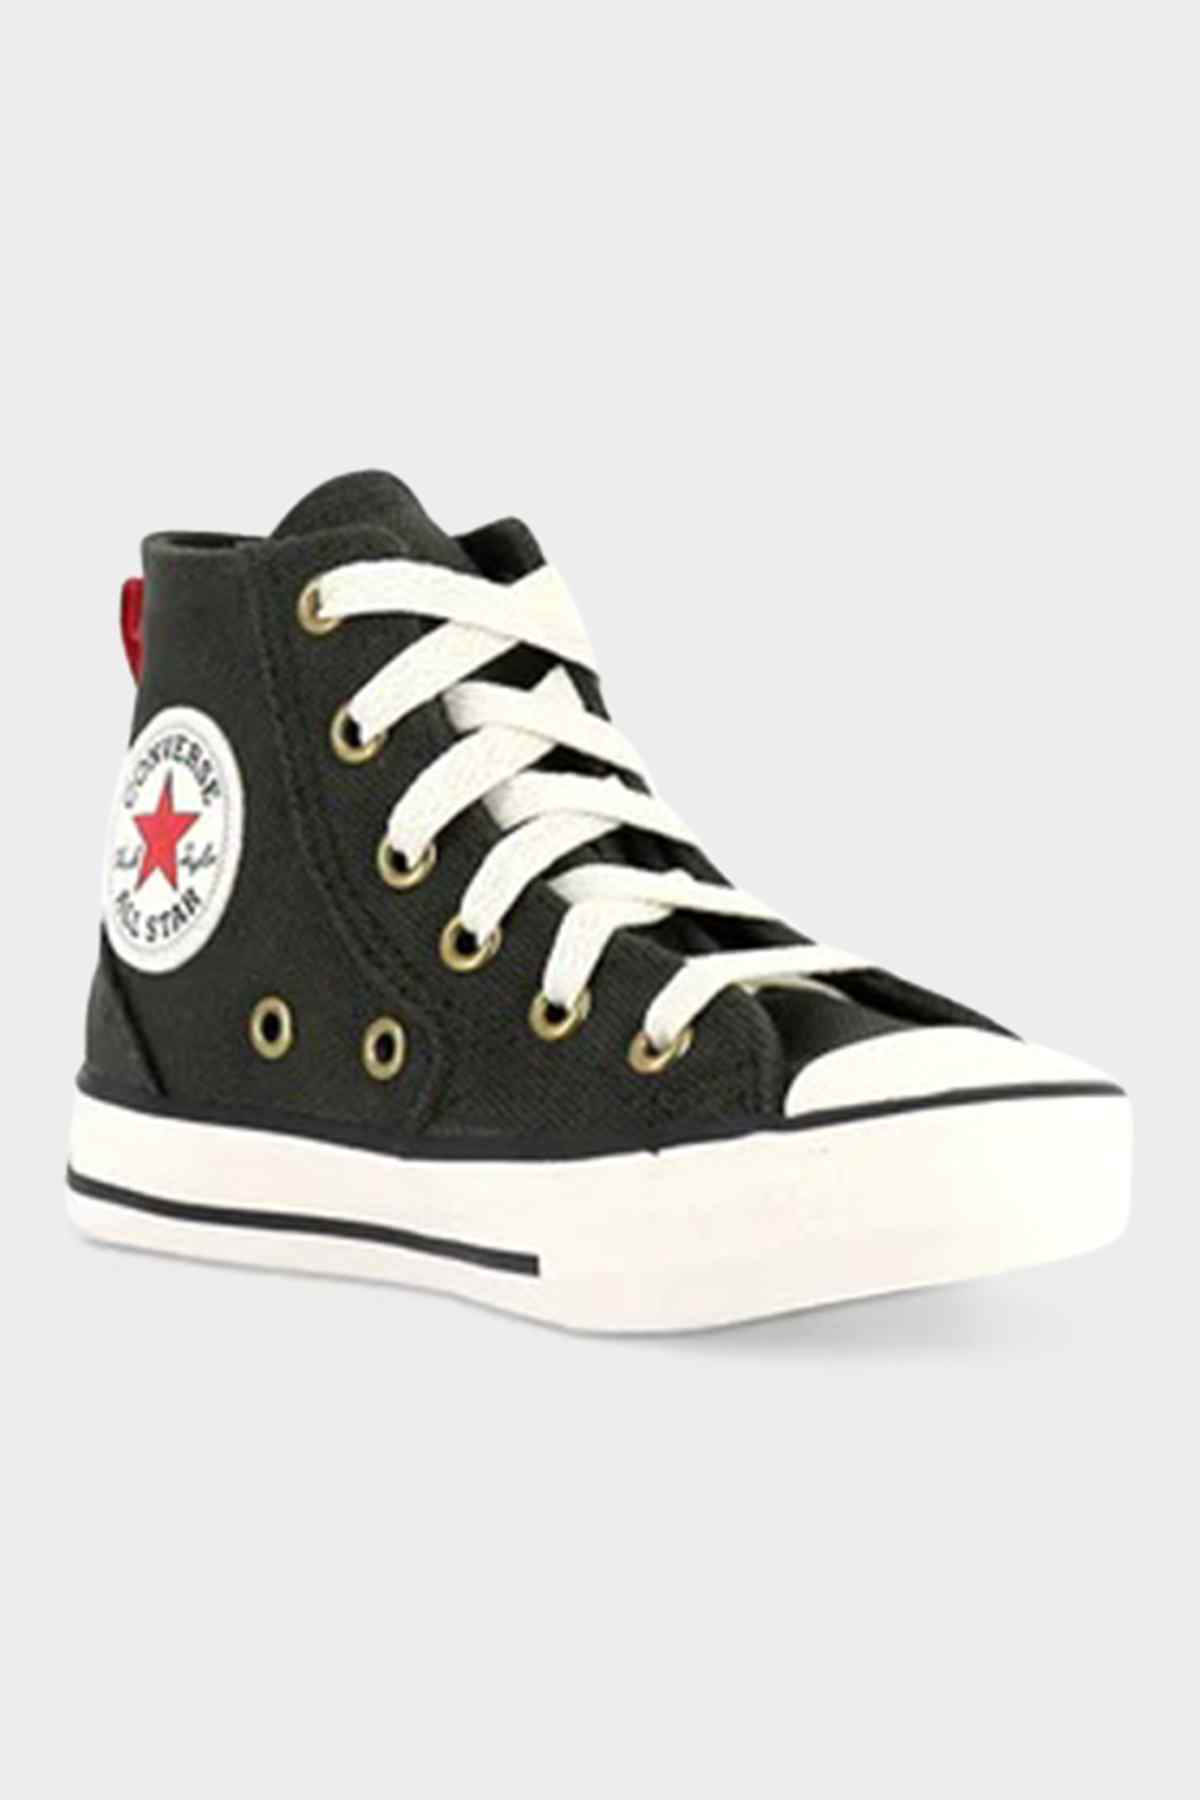 Converse Youth CT MFG Craft Remastered Hi Forest Shelter/Egret/Red